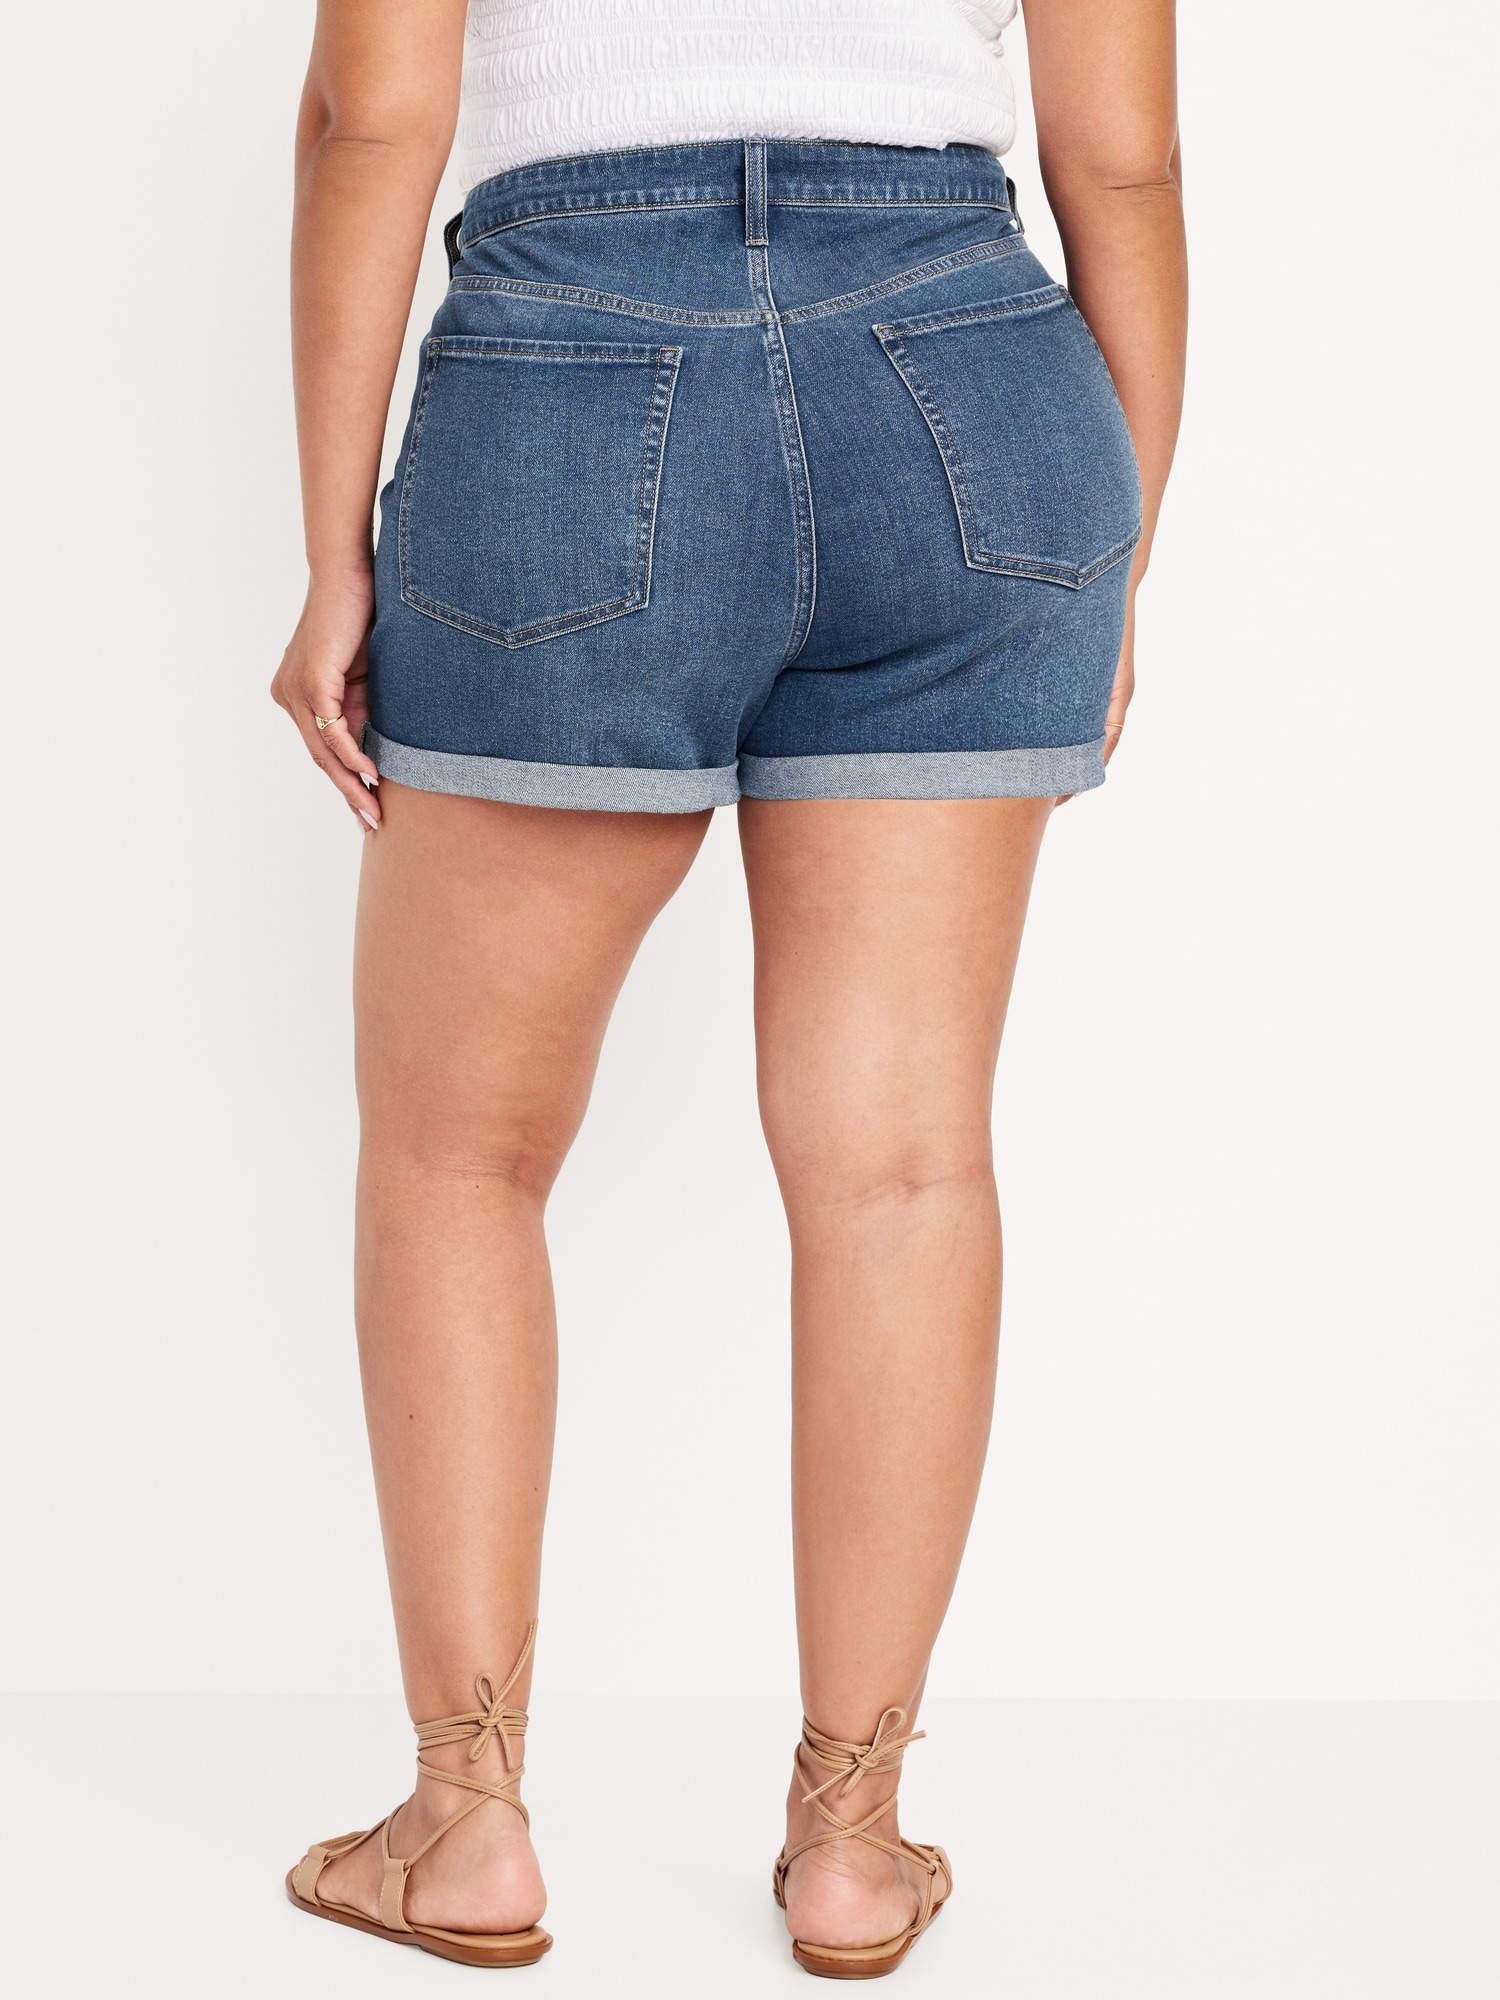 High-Waisted OG Cuffed Jean Shorts -- 3-inch inseam | Old Navy